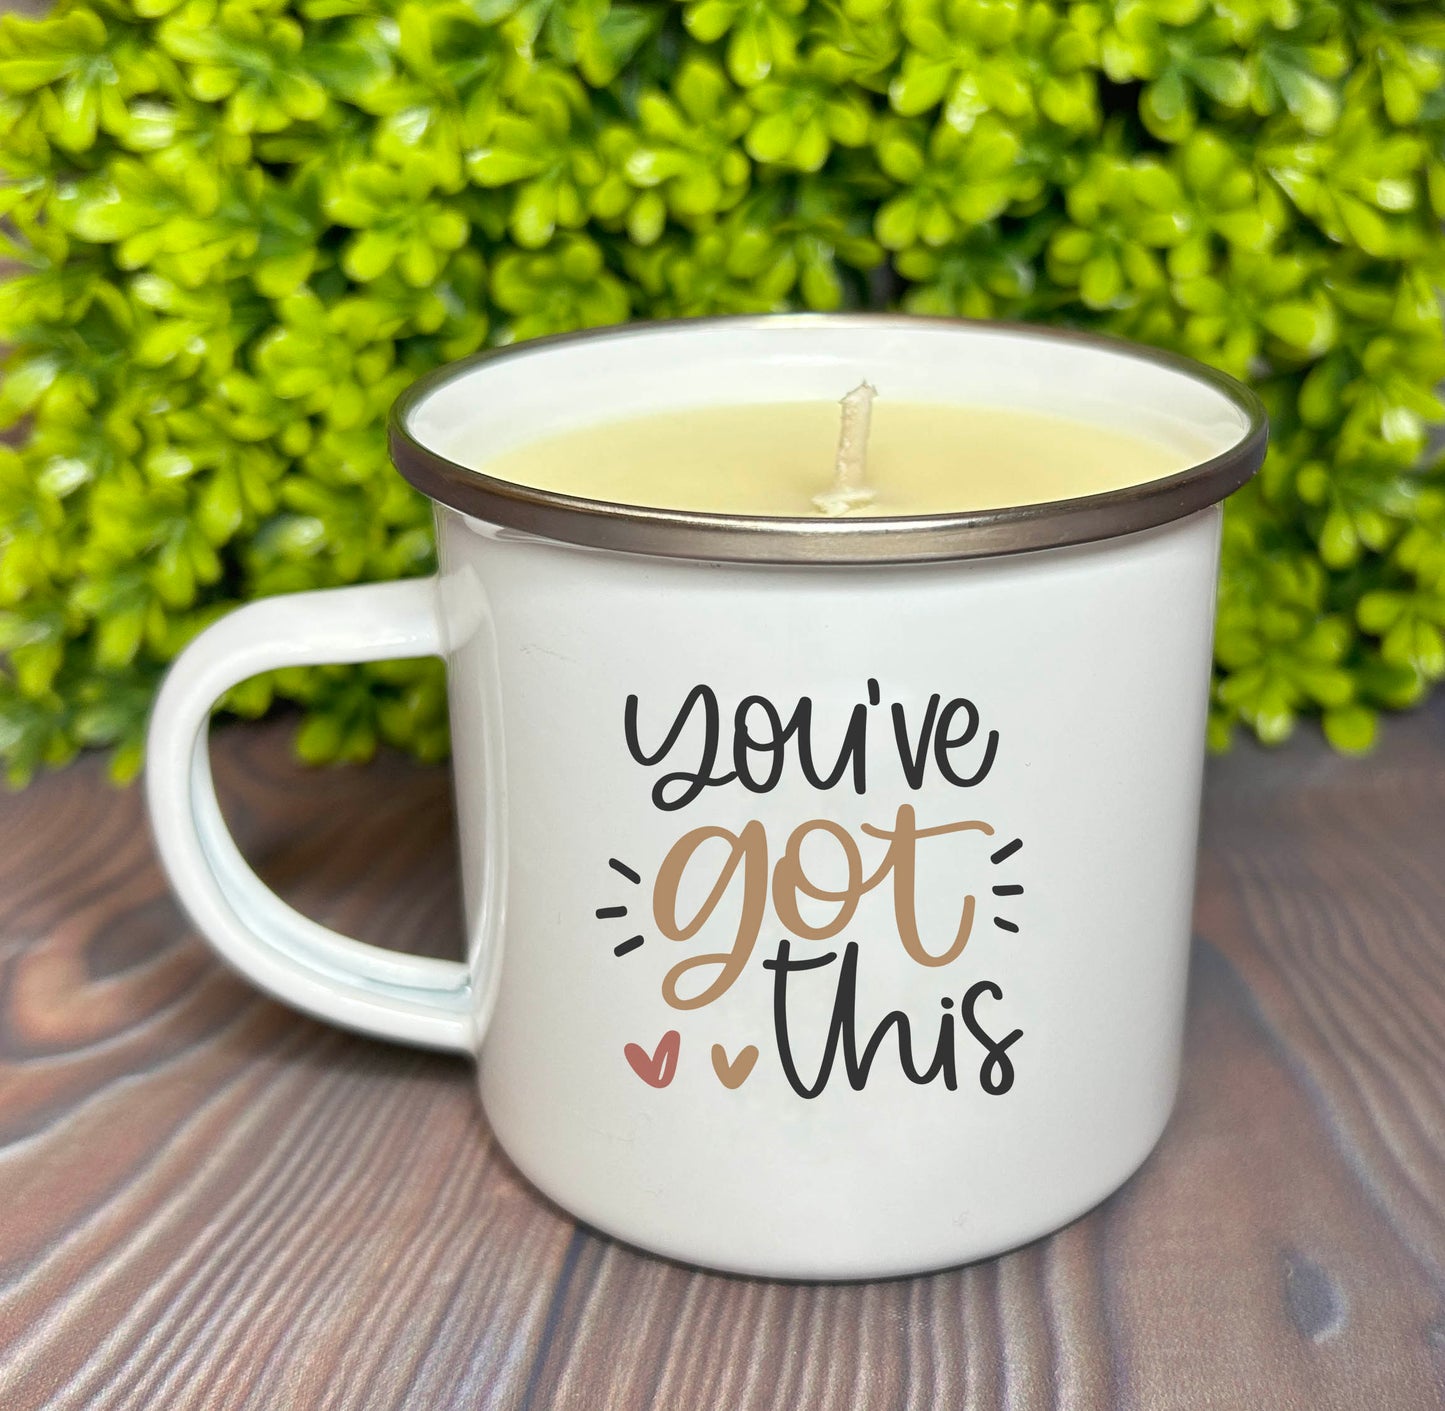 Wholesale - THE BESTSELLER PACKAGE of 36 ENAMEL MUG CANDLES CHOICE OF DESIGNS/SCENTS